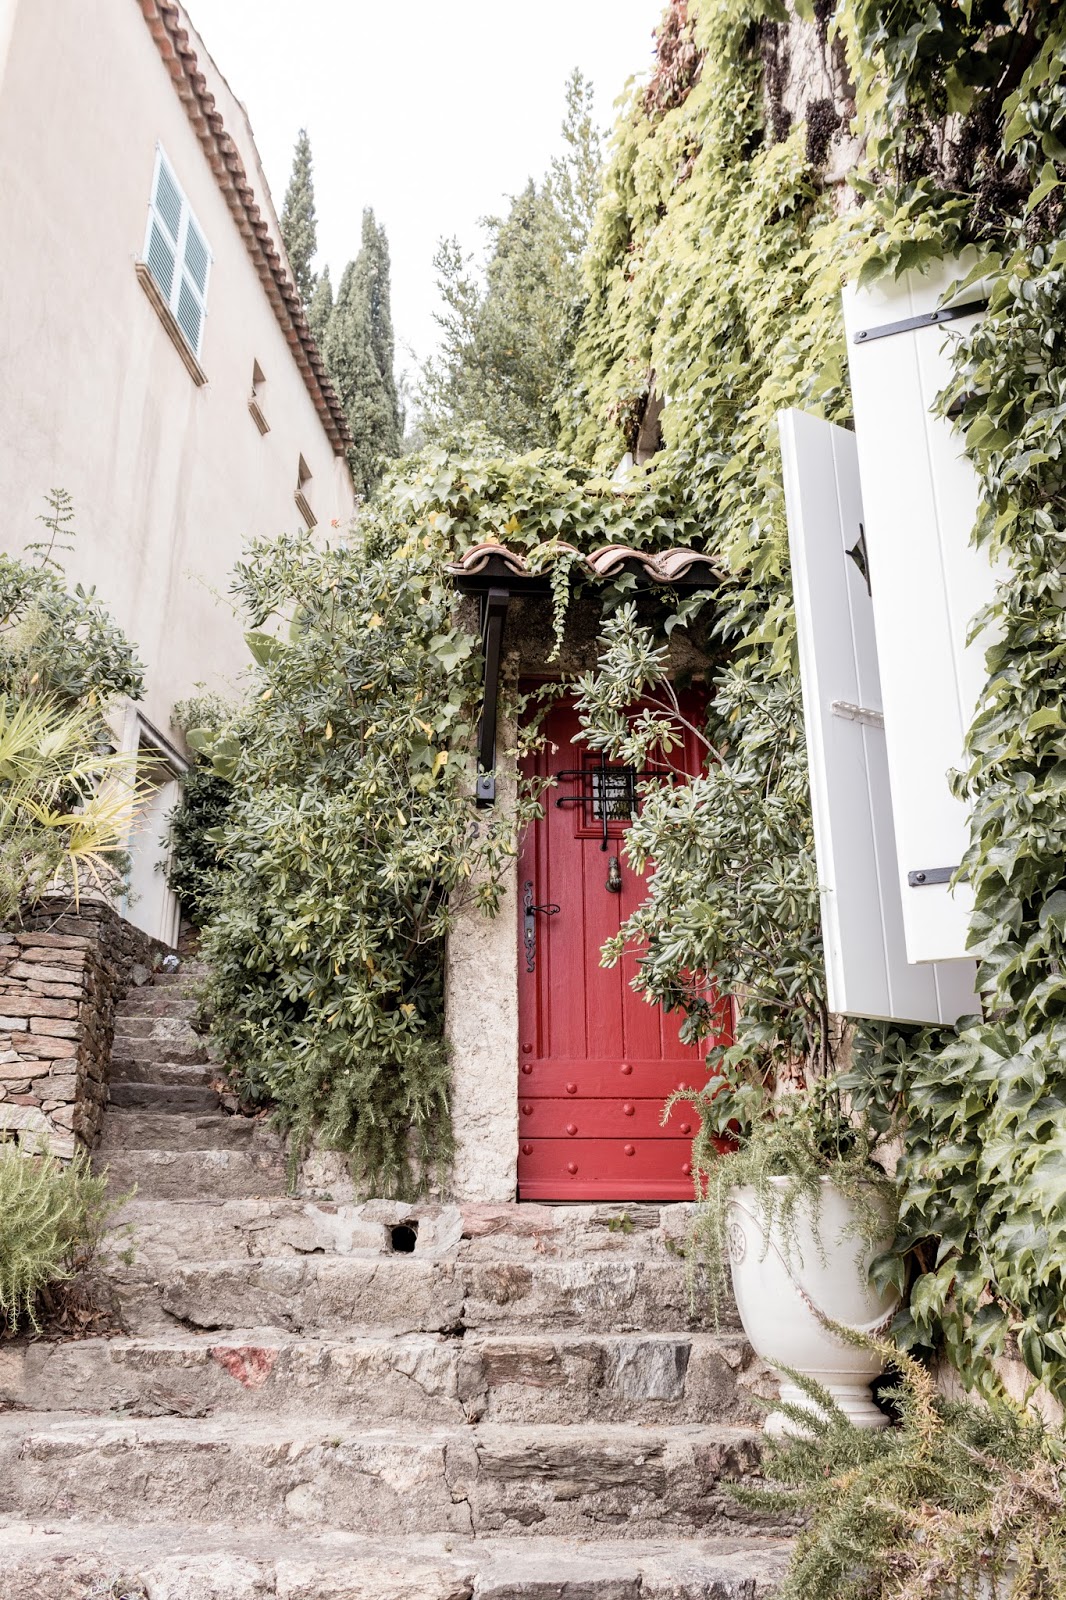 Rustic French Country Doors in Provence and gorgeous curb appeal with climbing vines, crumbling stone, and weathered age. Photo: The Flying Dutchwoman. #provence #southoffrance #exteriors #weathereddoors #rusticdoor #frenchcountryside #summerinfrance #frenchcountry #frenchfarmhouse #frontdoor #sttropez